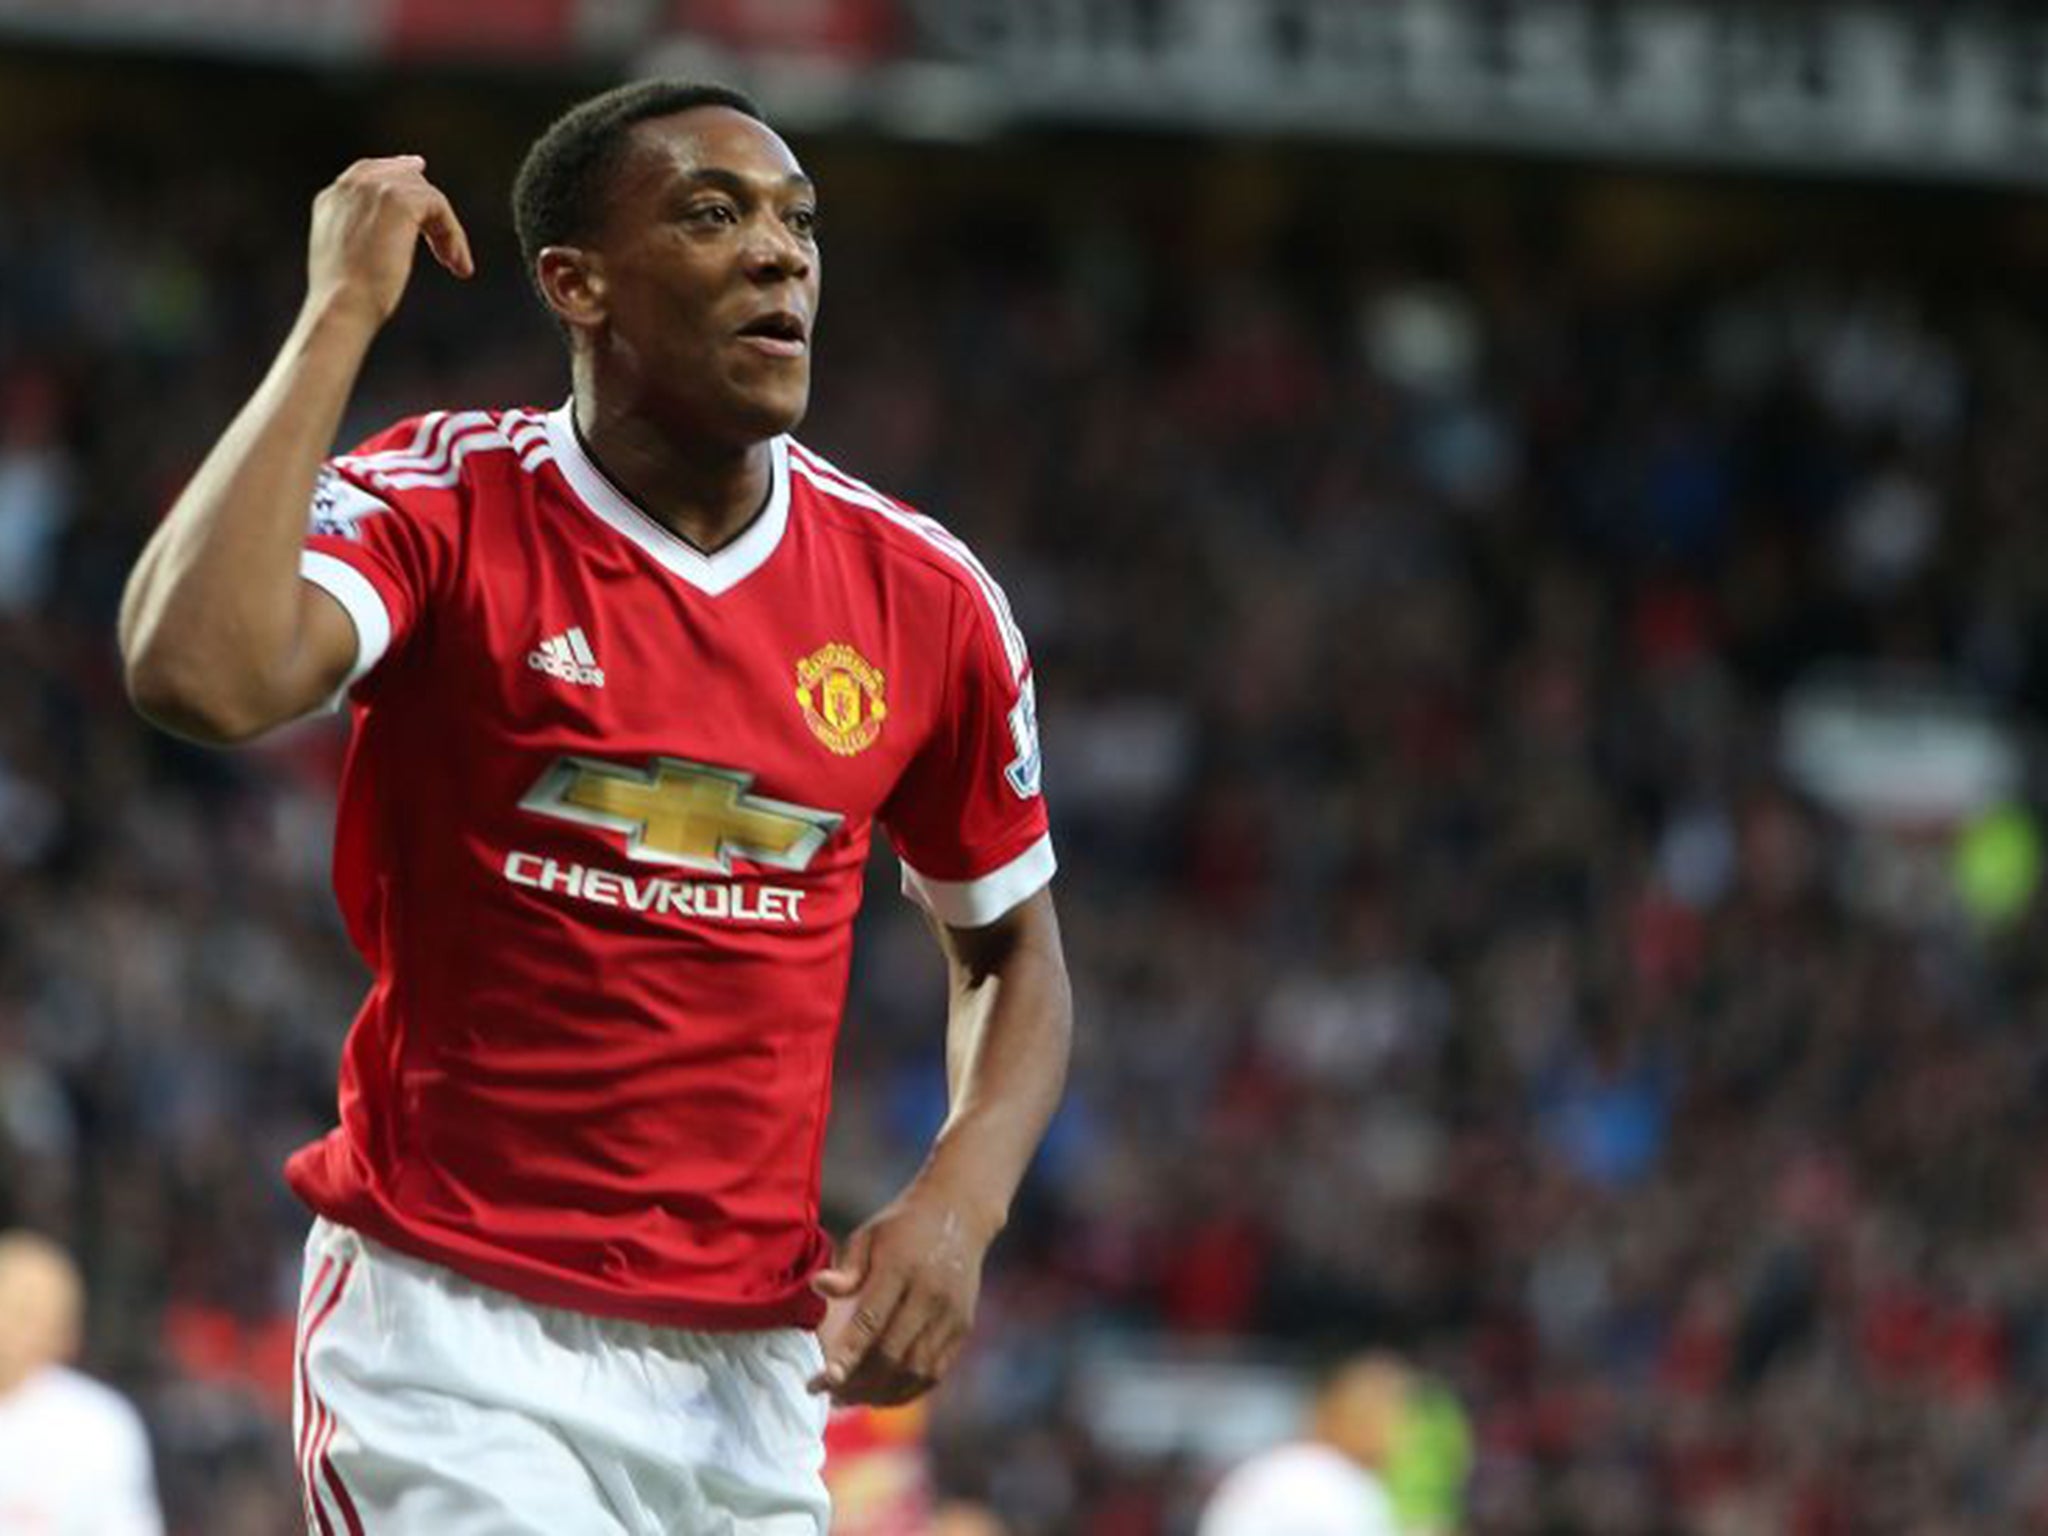 Manchester United’s Anthony Martial, whose side are one of several title contenders